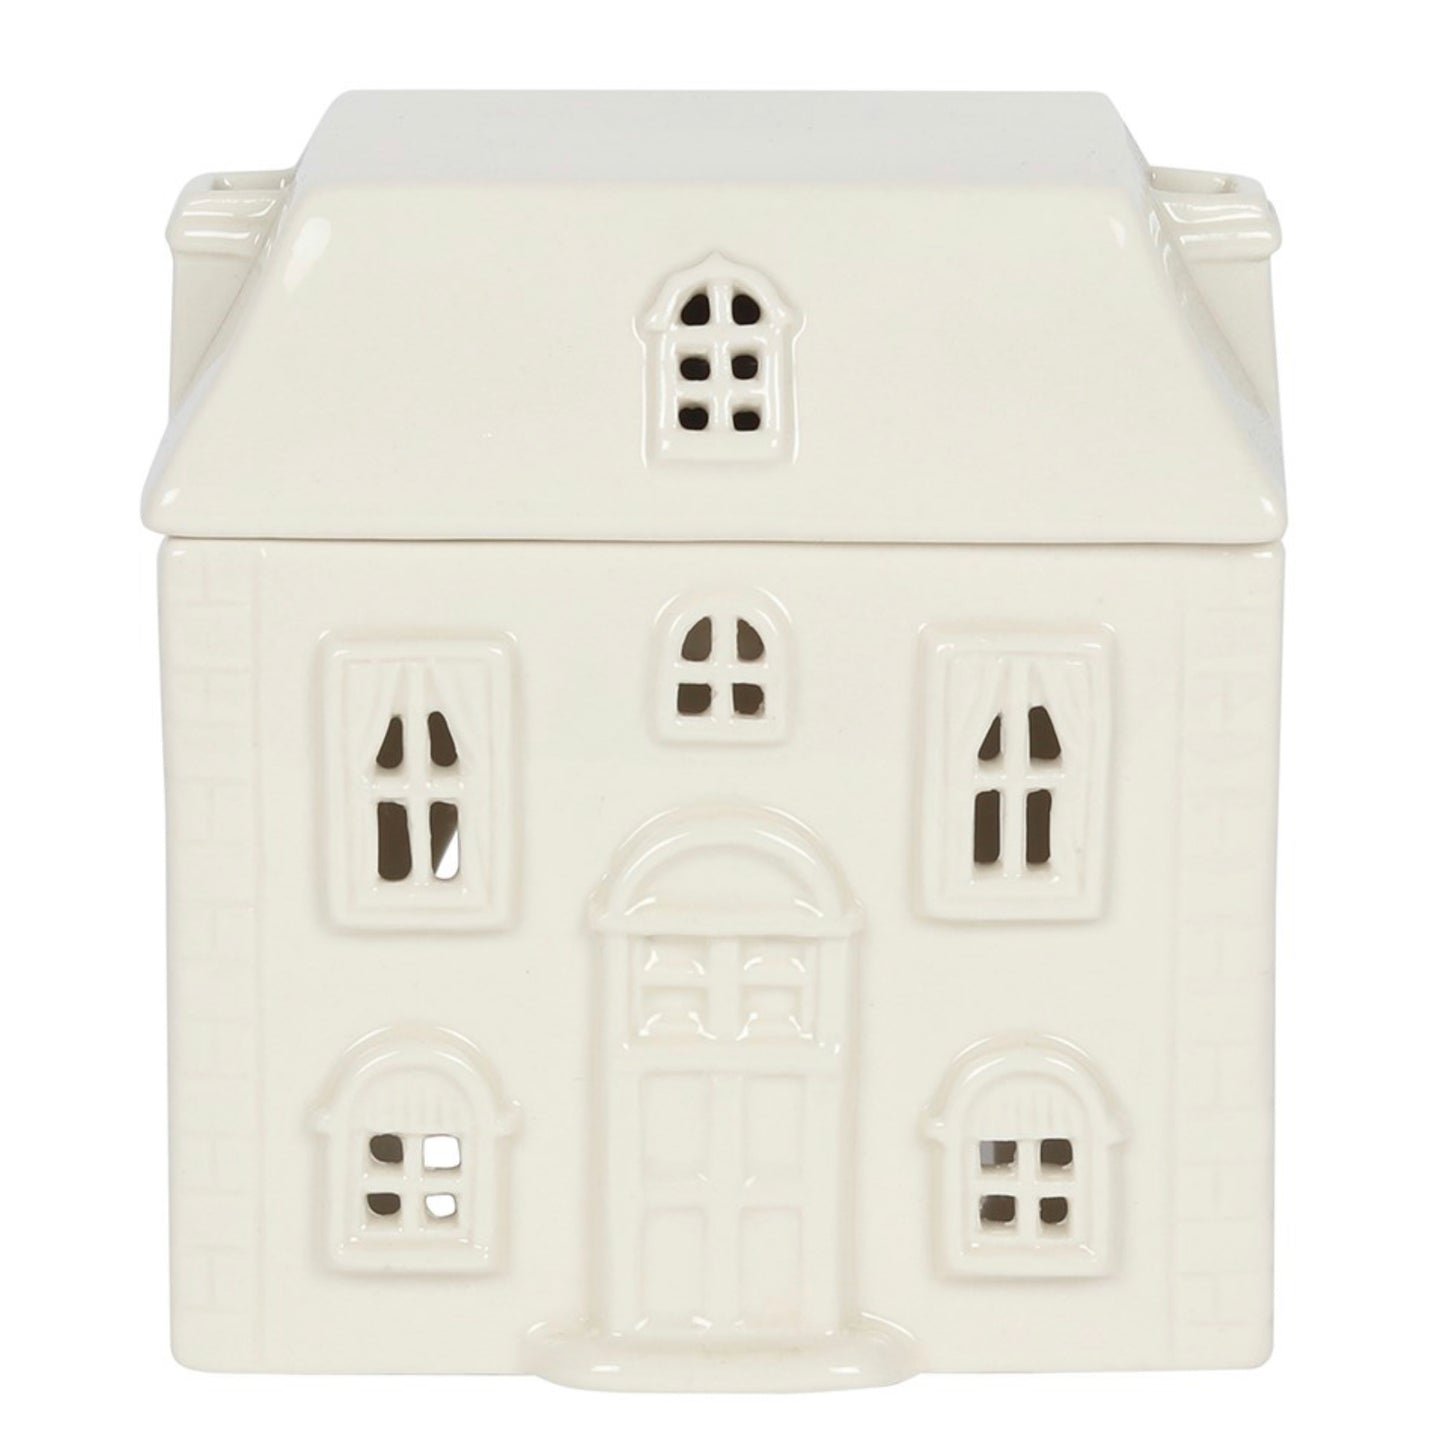 The Town House Burner with Wax Melts gift set